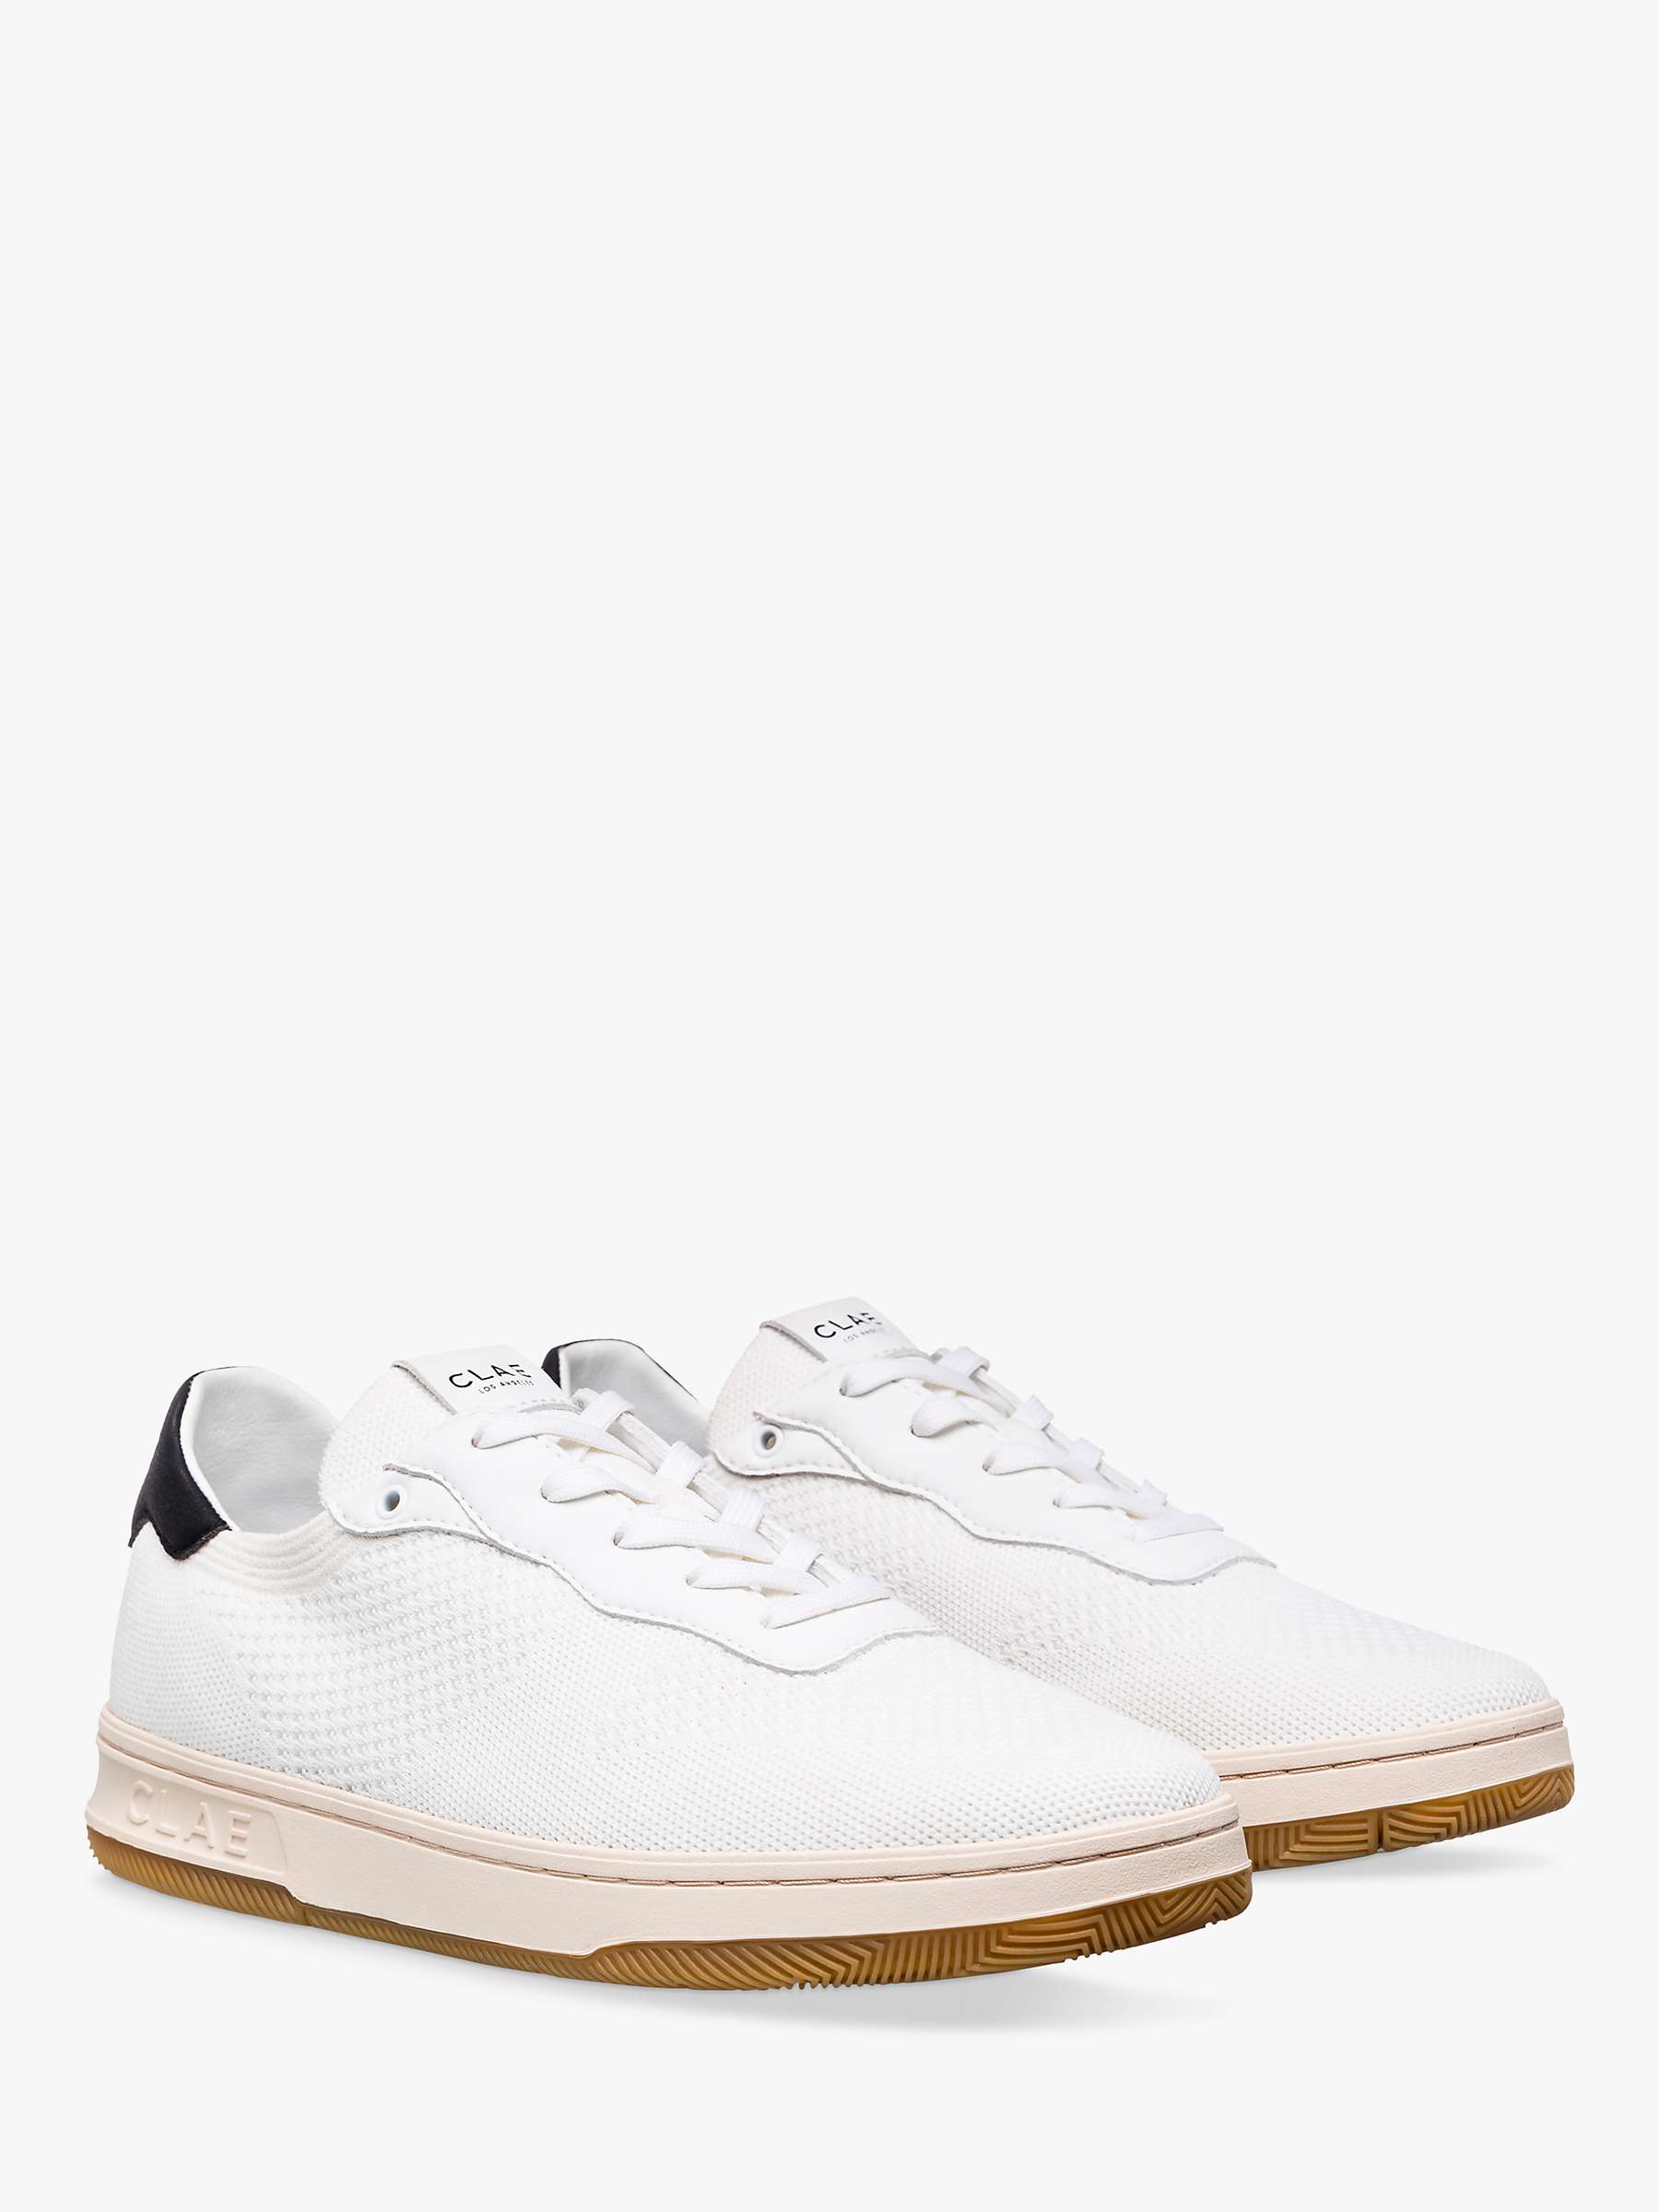 Buy CLAE Malone Knitted Lace Up Trainers Online at johnlewis.com